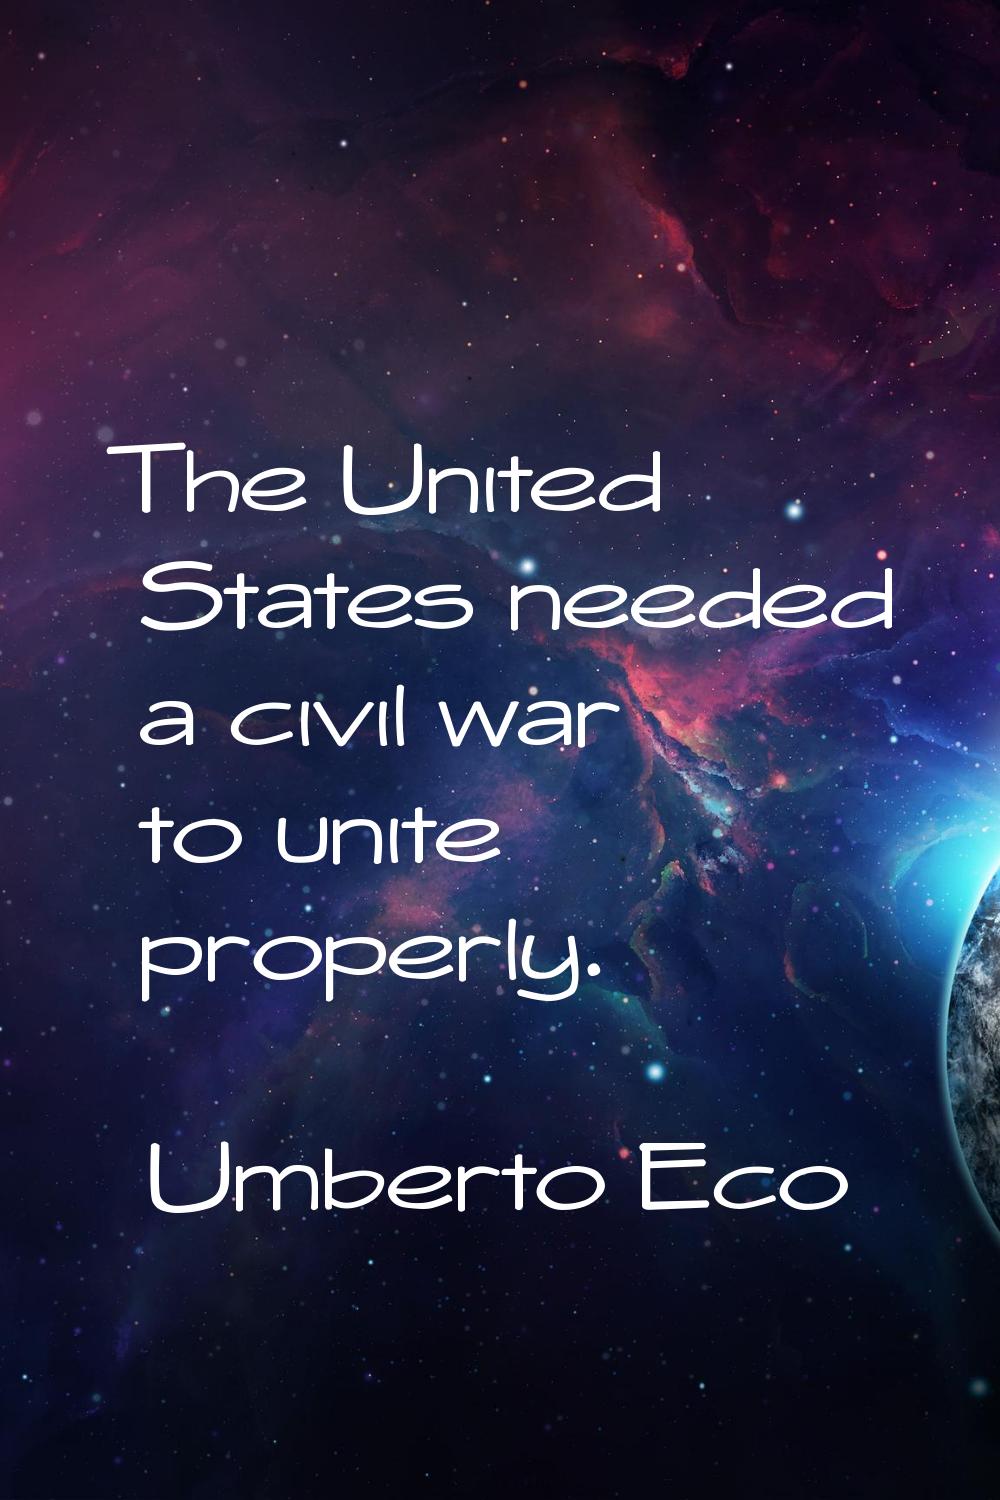 The United States needed a civil war to unite properly.